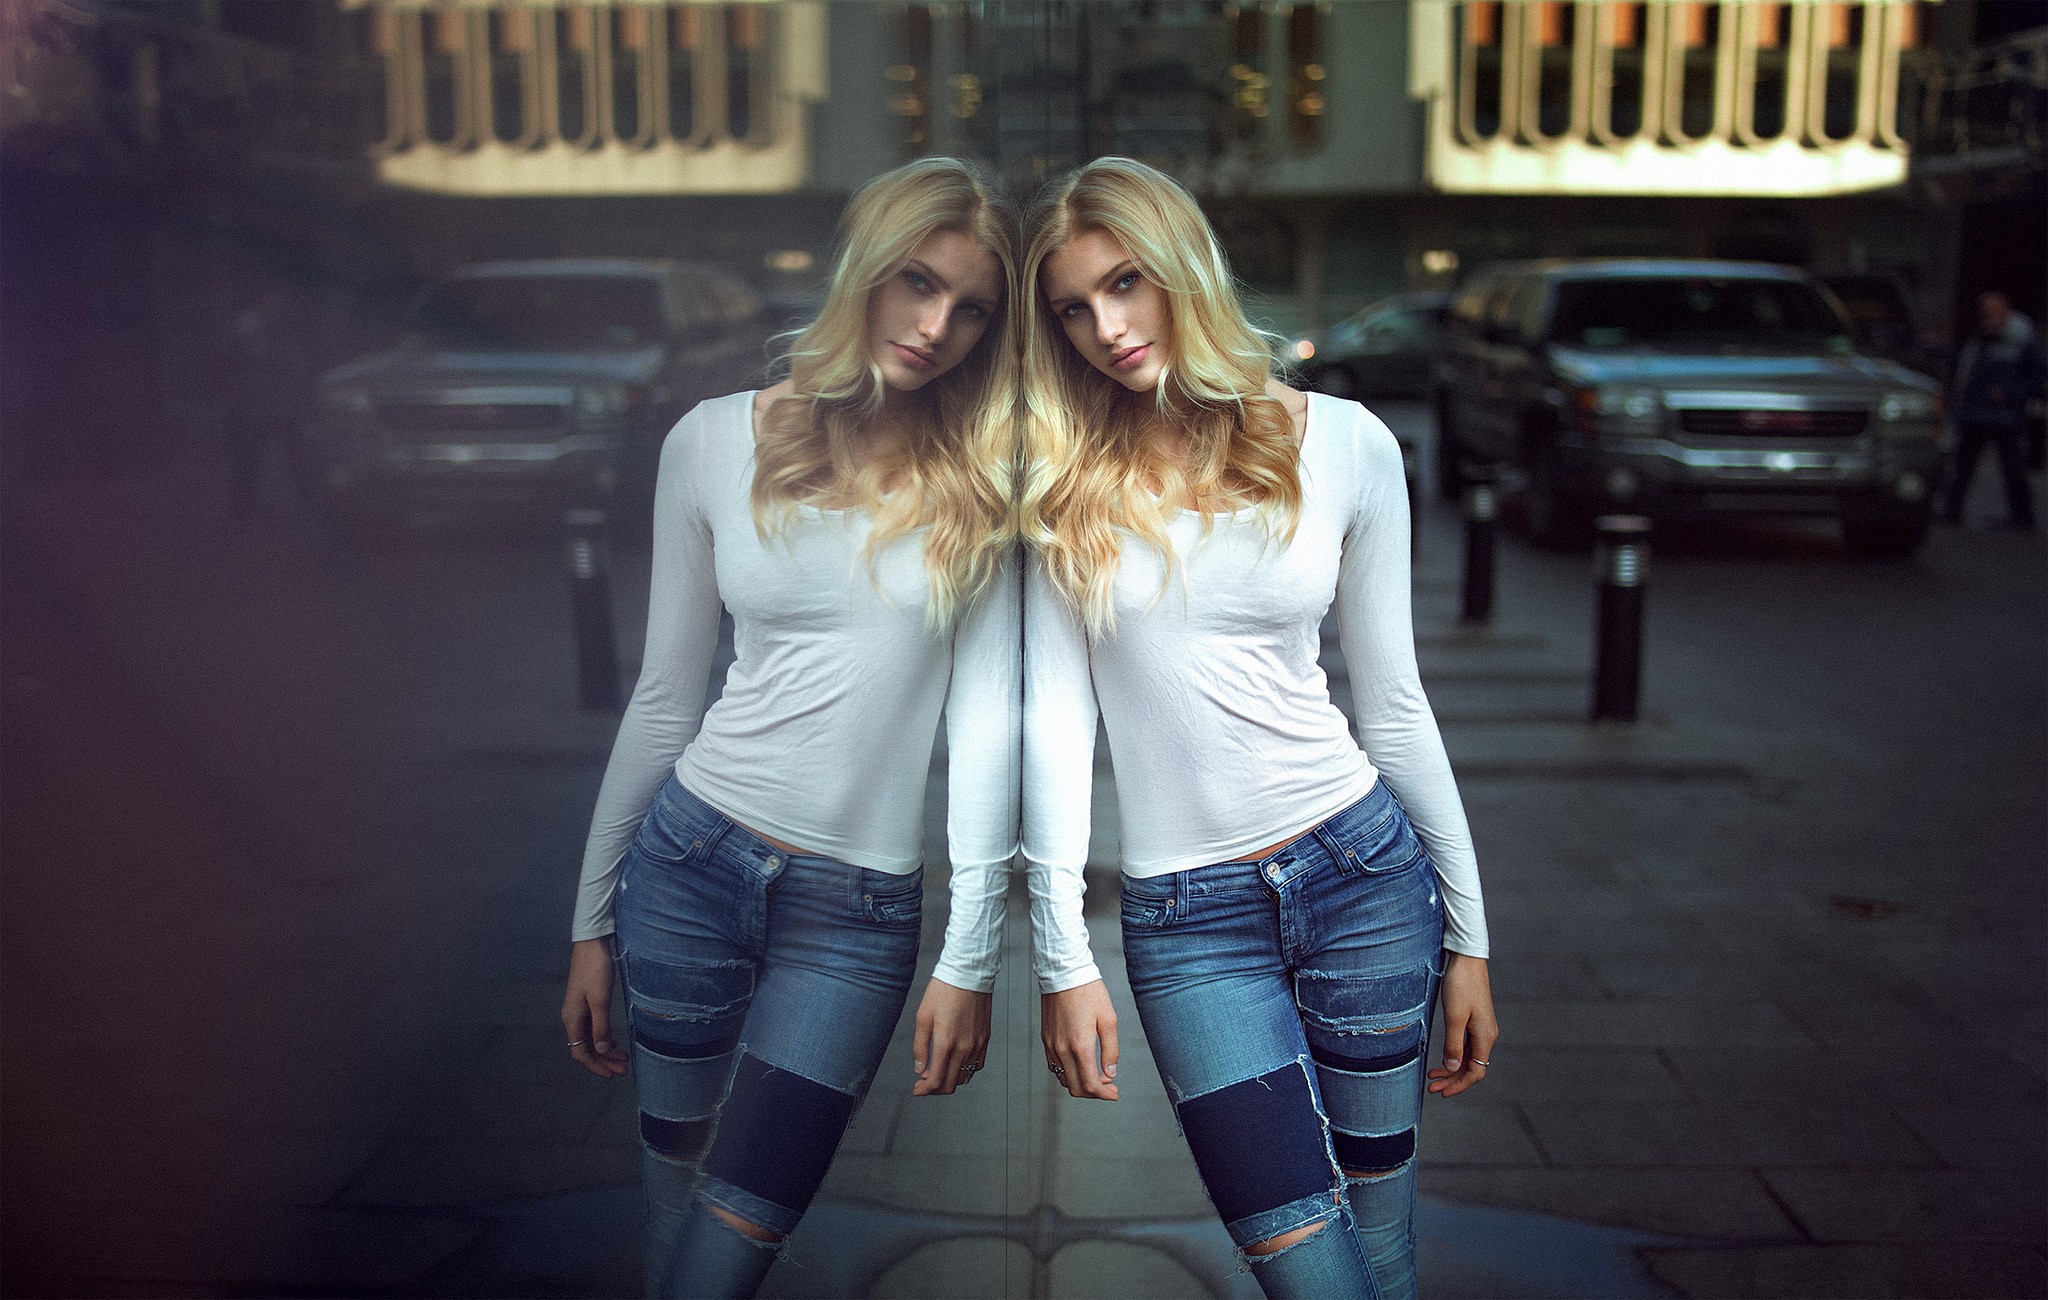 People 2048x1300 women blonde jeans torn jeans glass reflection urban women outdoors slim body looking at viewer street car city long hair white shirt